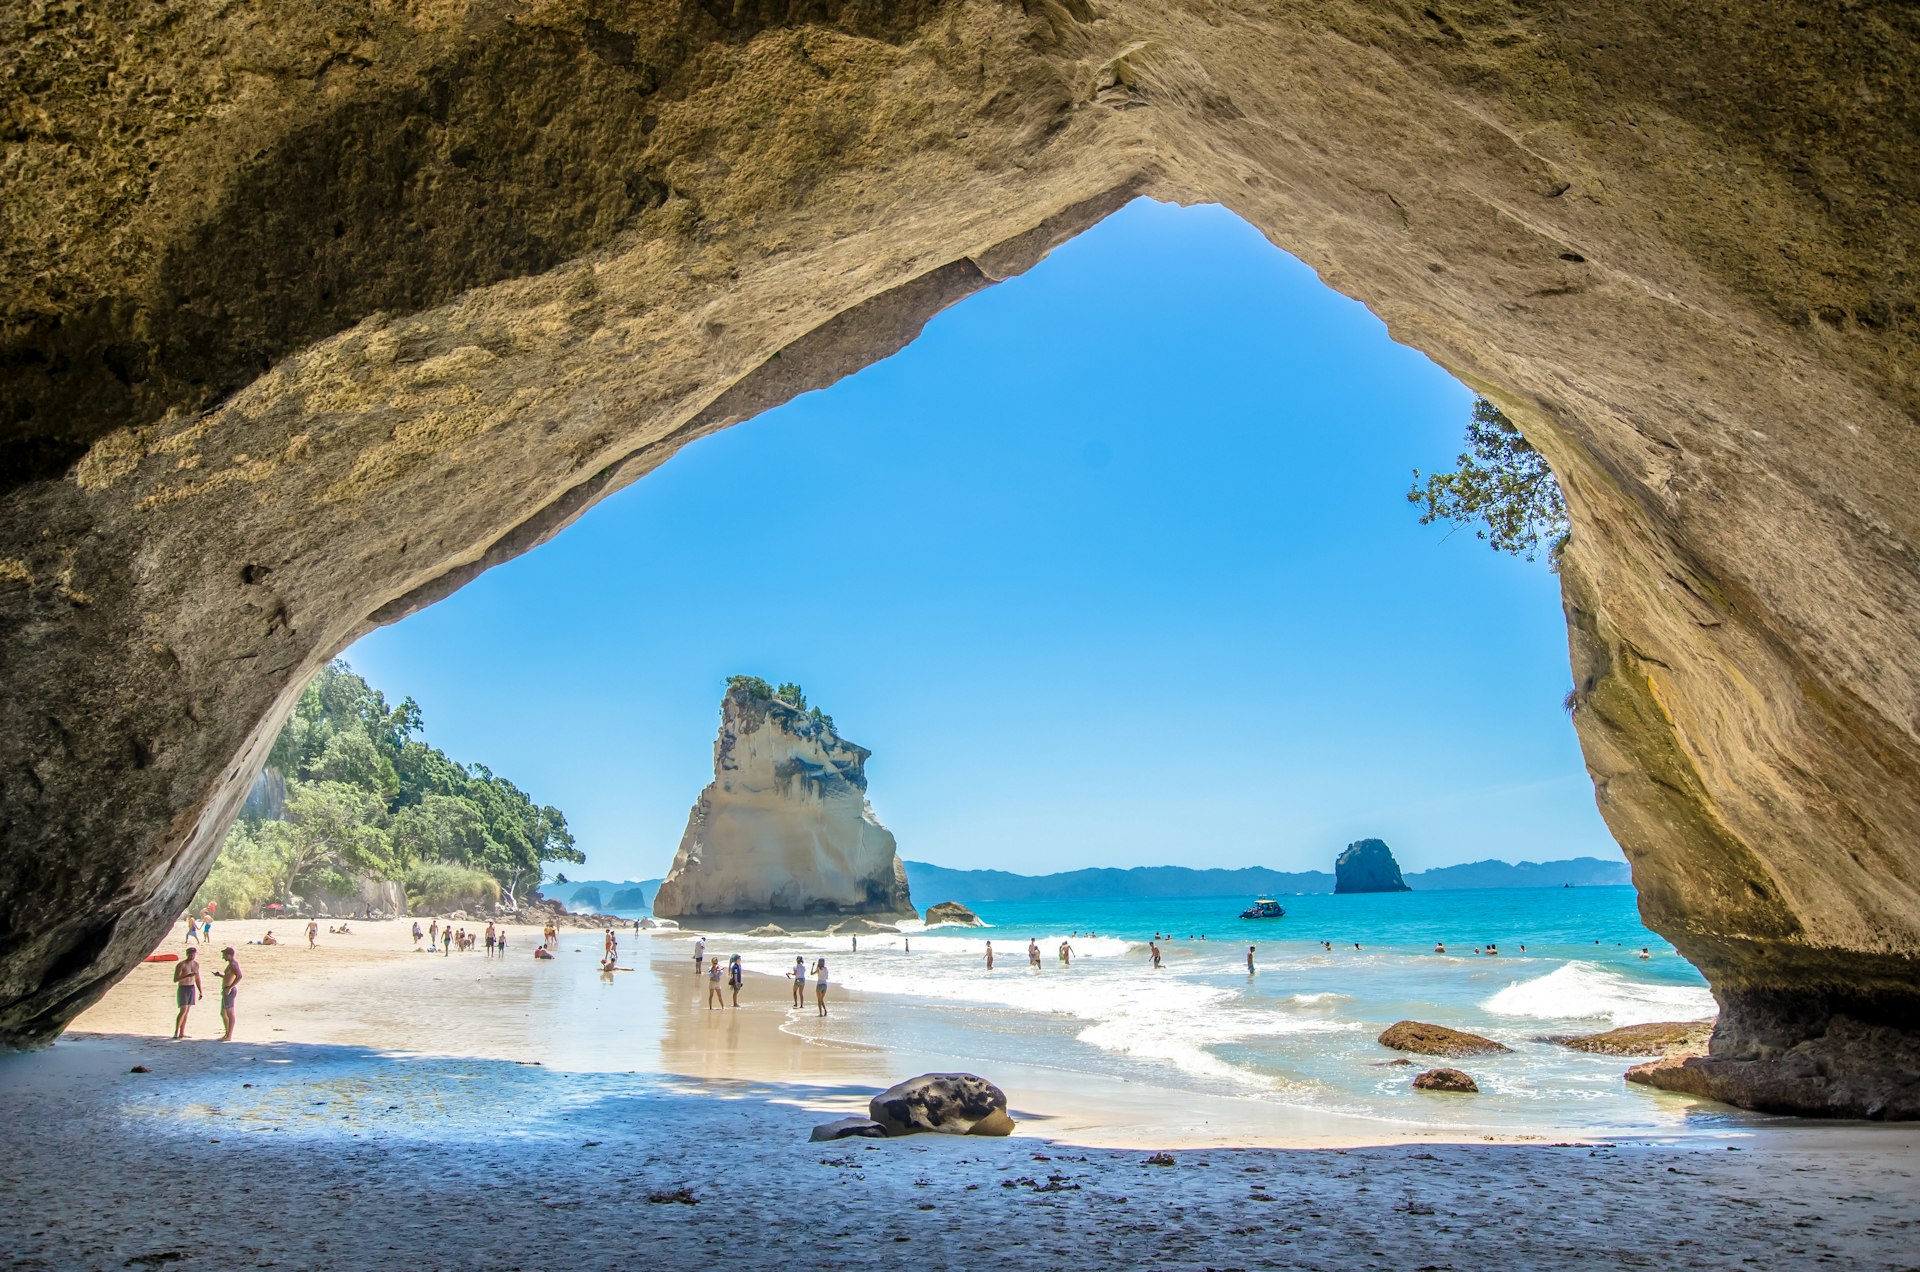 The beach at Cathedral Cove as photographed through the stone arch. It's a busy sunny day with lots of people on the beach